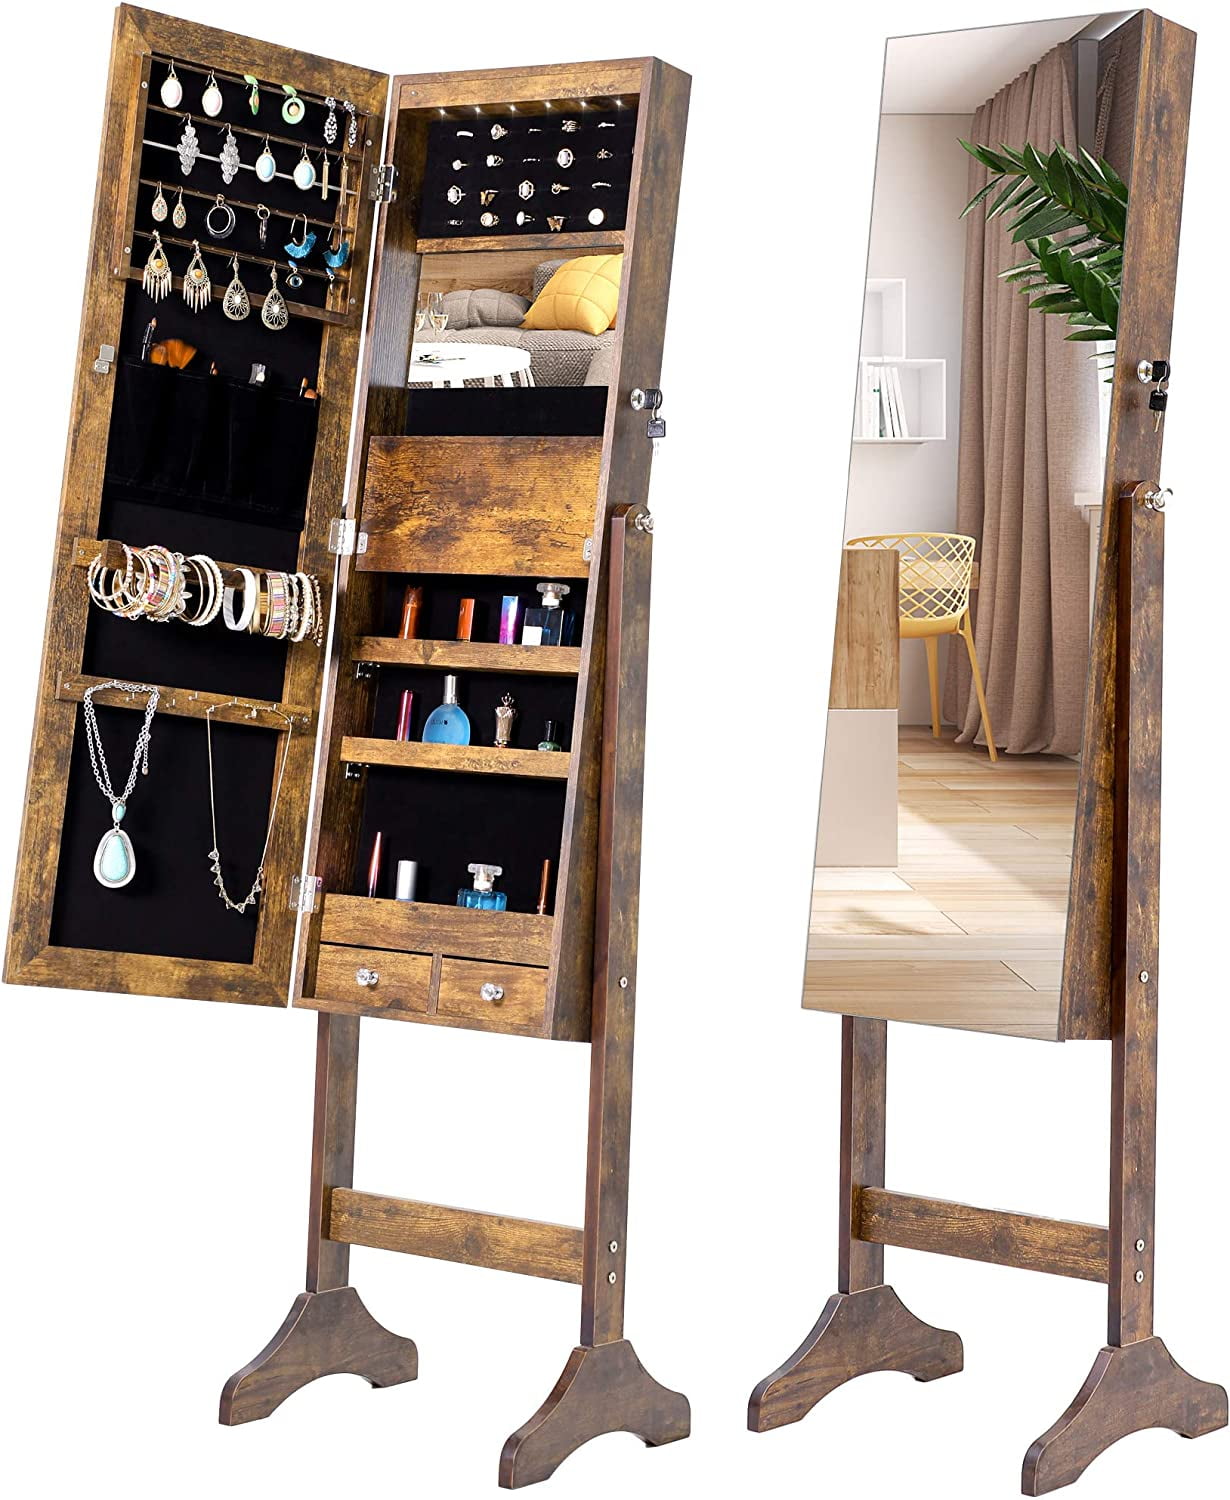 Leds Free Standing Jewelry Cabinet, Freestanding Floor Mirror With Storage